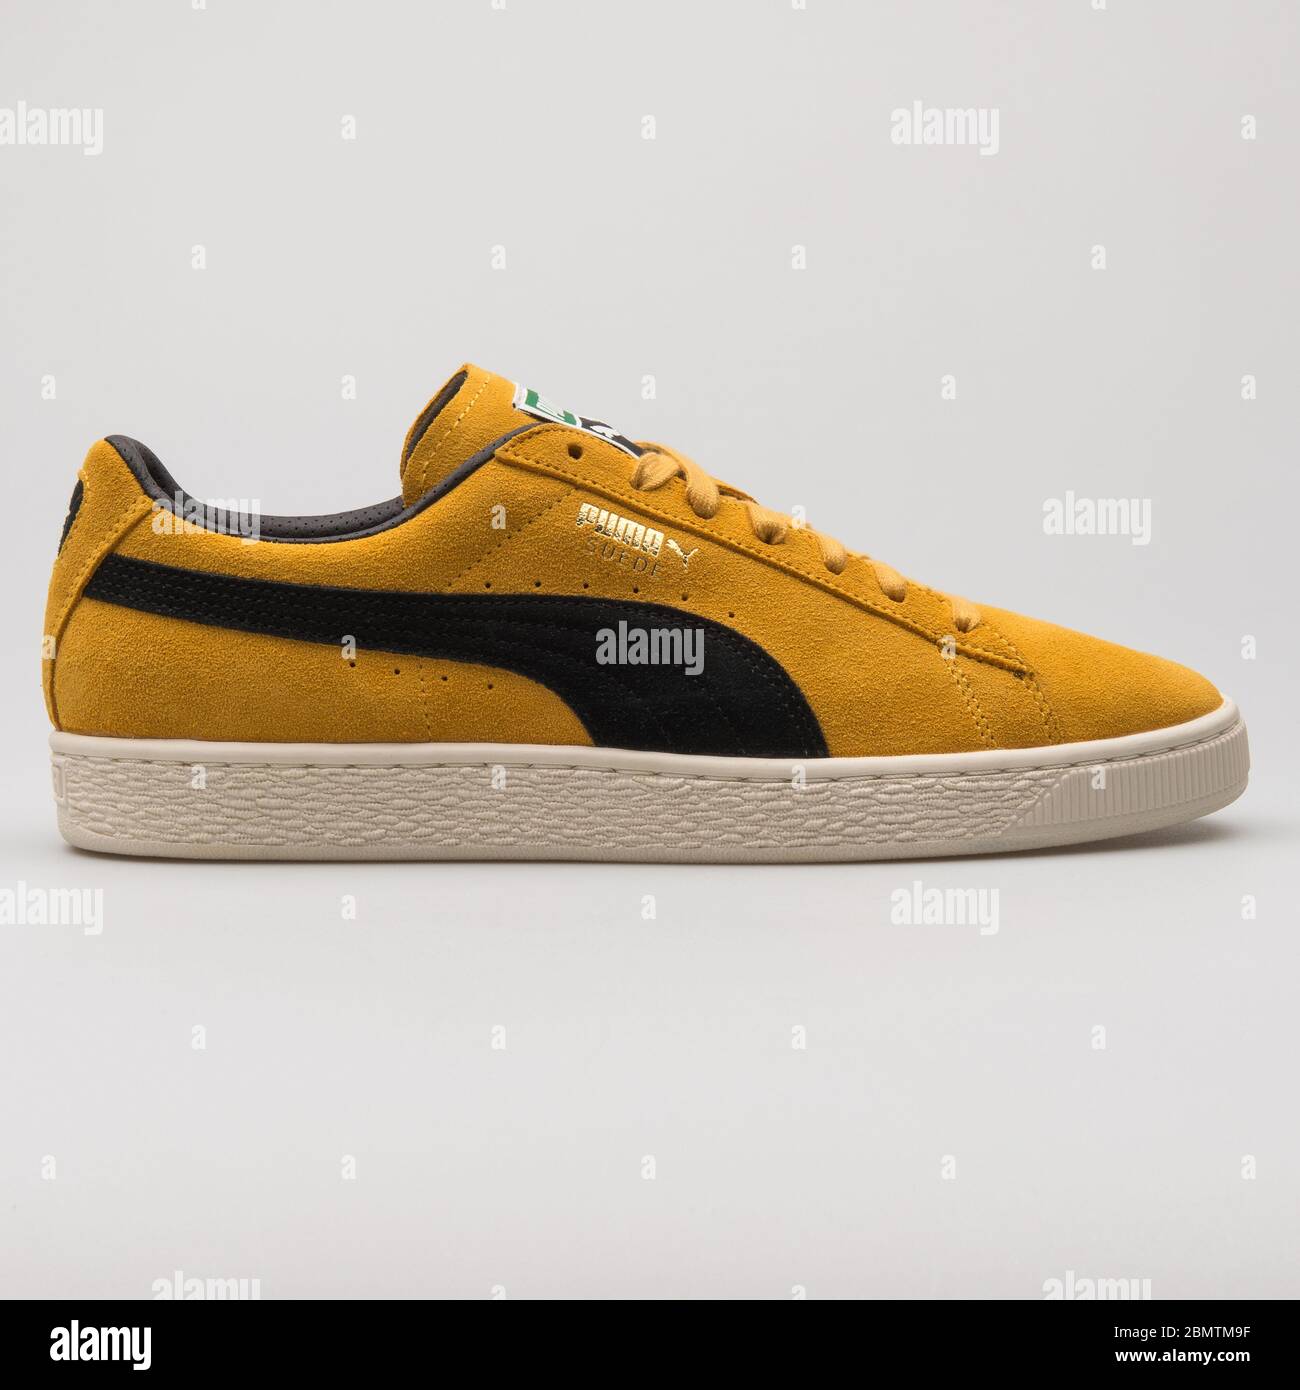 VIENNA, AUSTRIA - FEBRUARY 19, 2018: Puma Suede Classic Archive yellow and  black sneaker on white background Stock Photo - Alamy